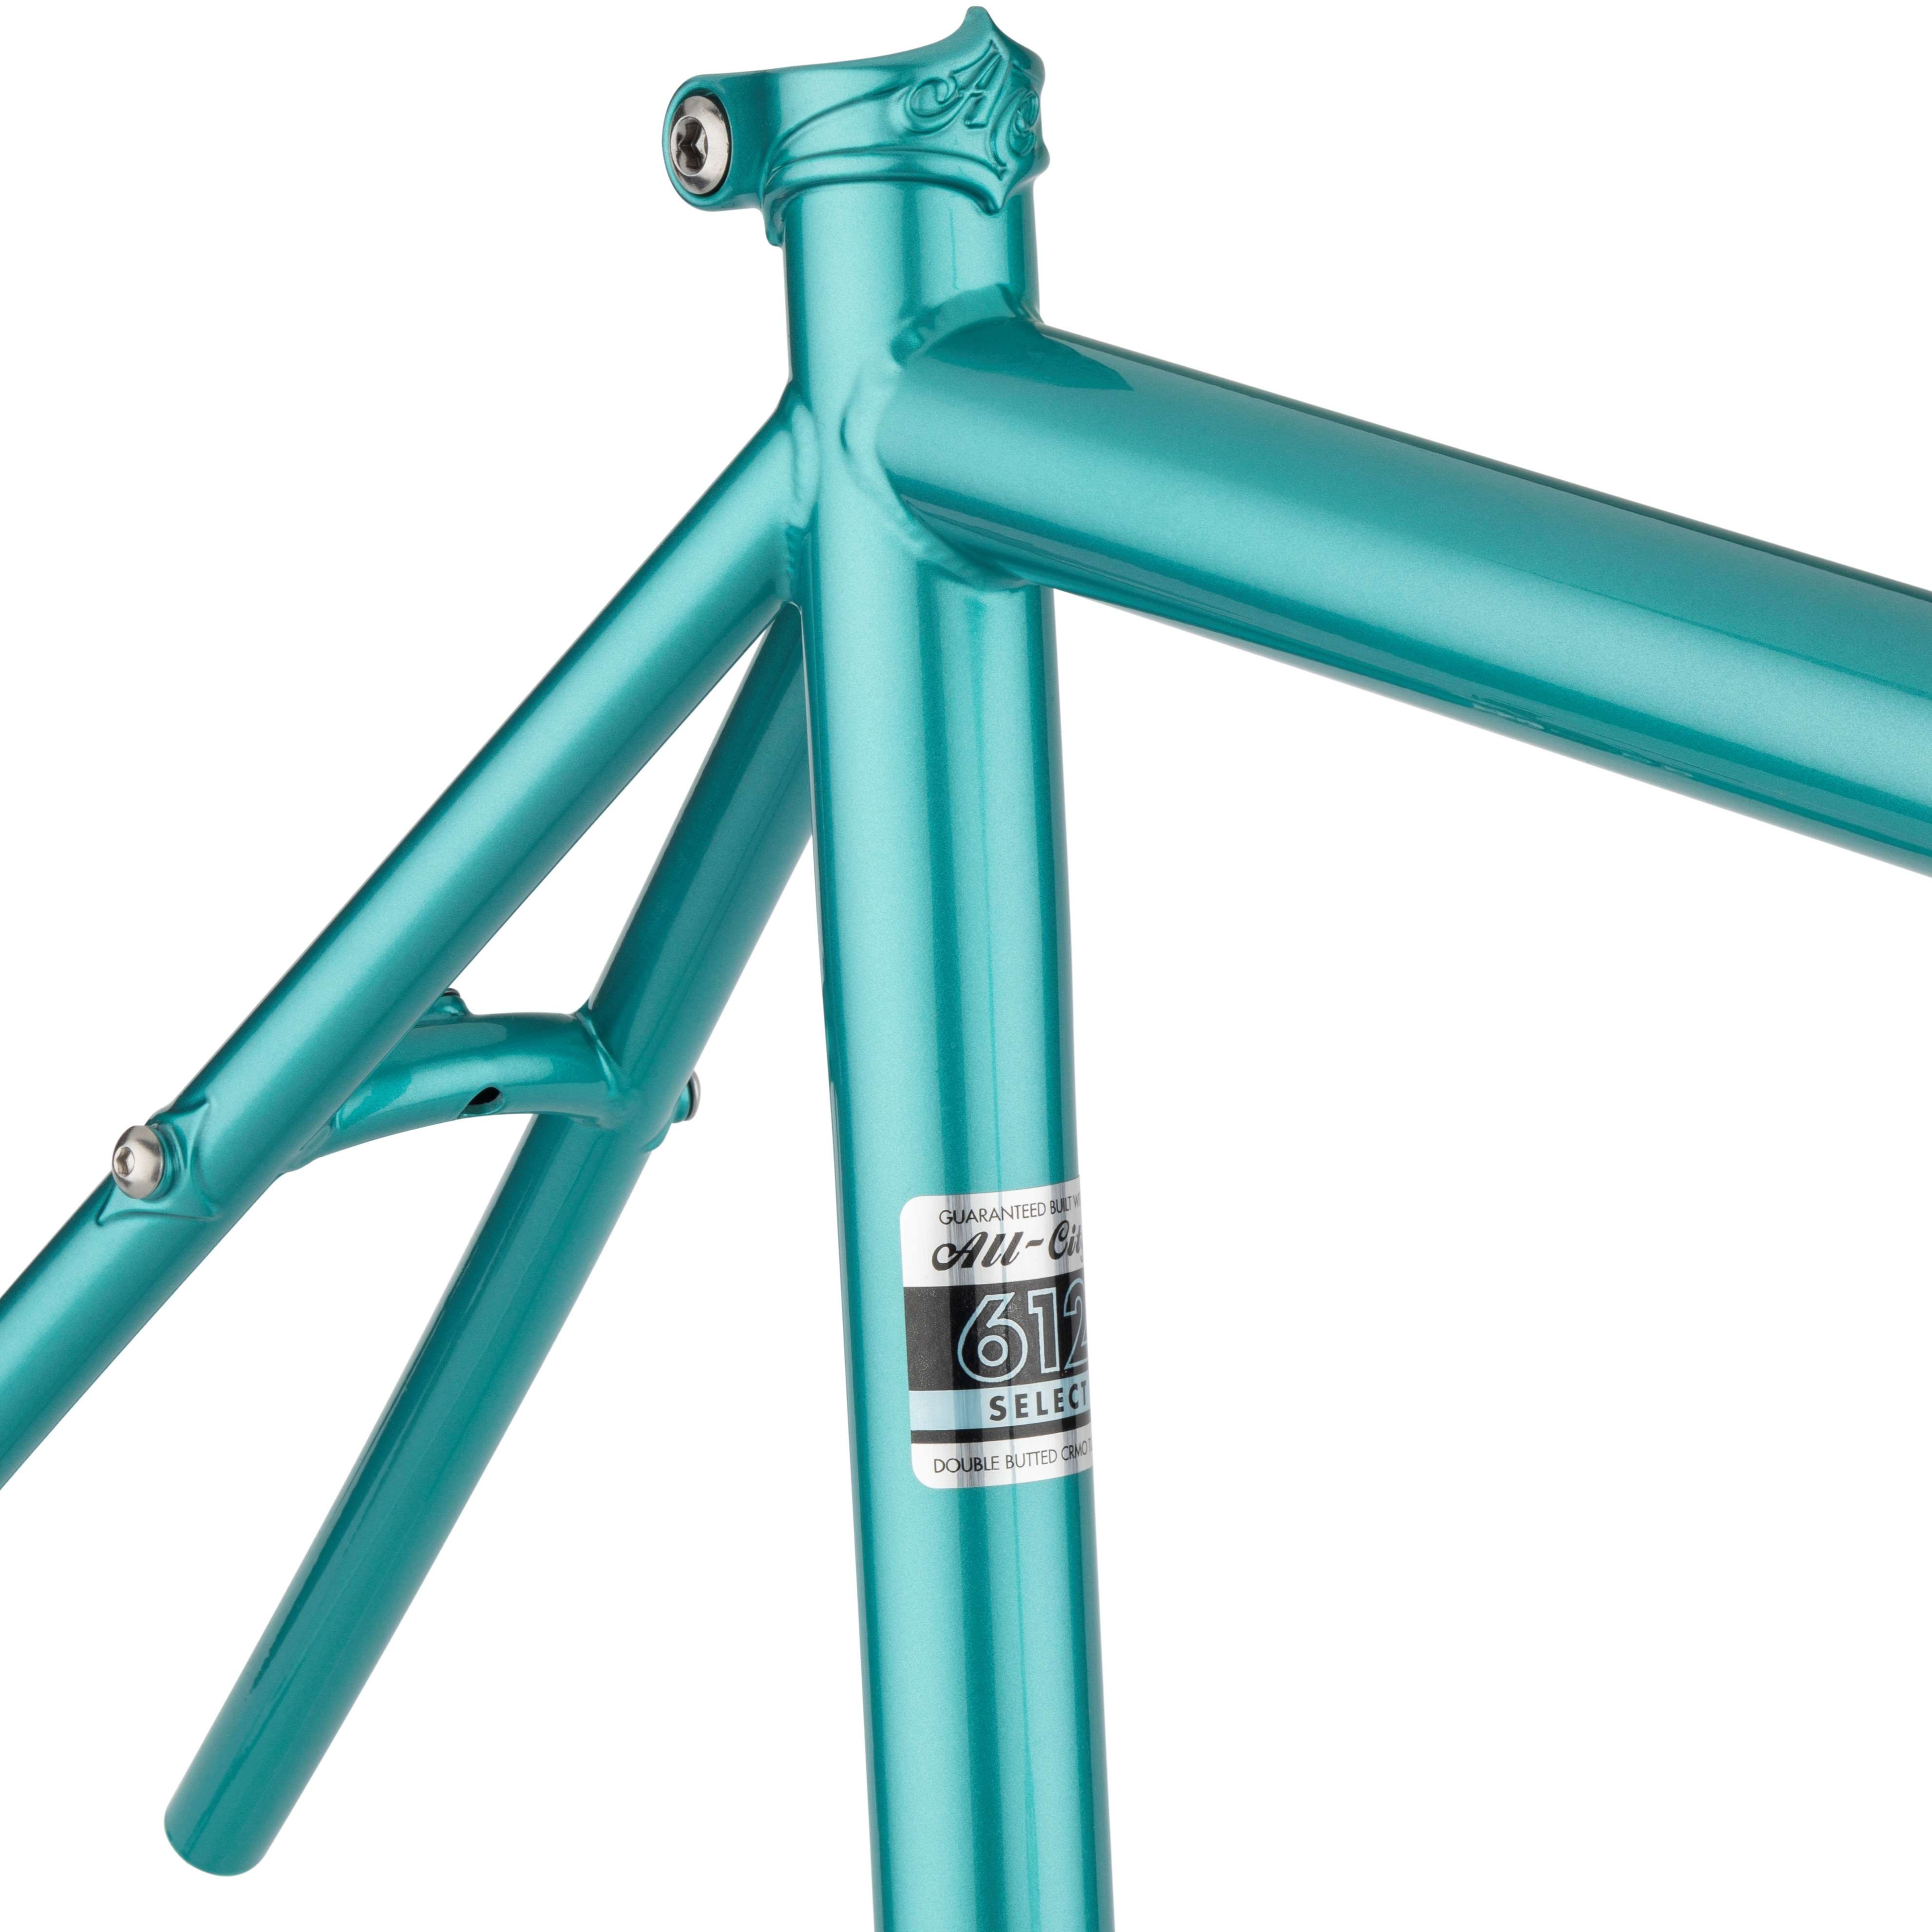 All-City Super Professional Frameset in Blue Panther